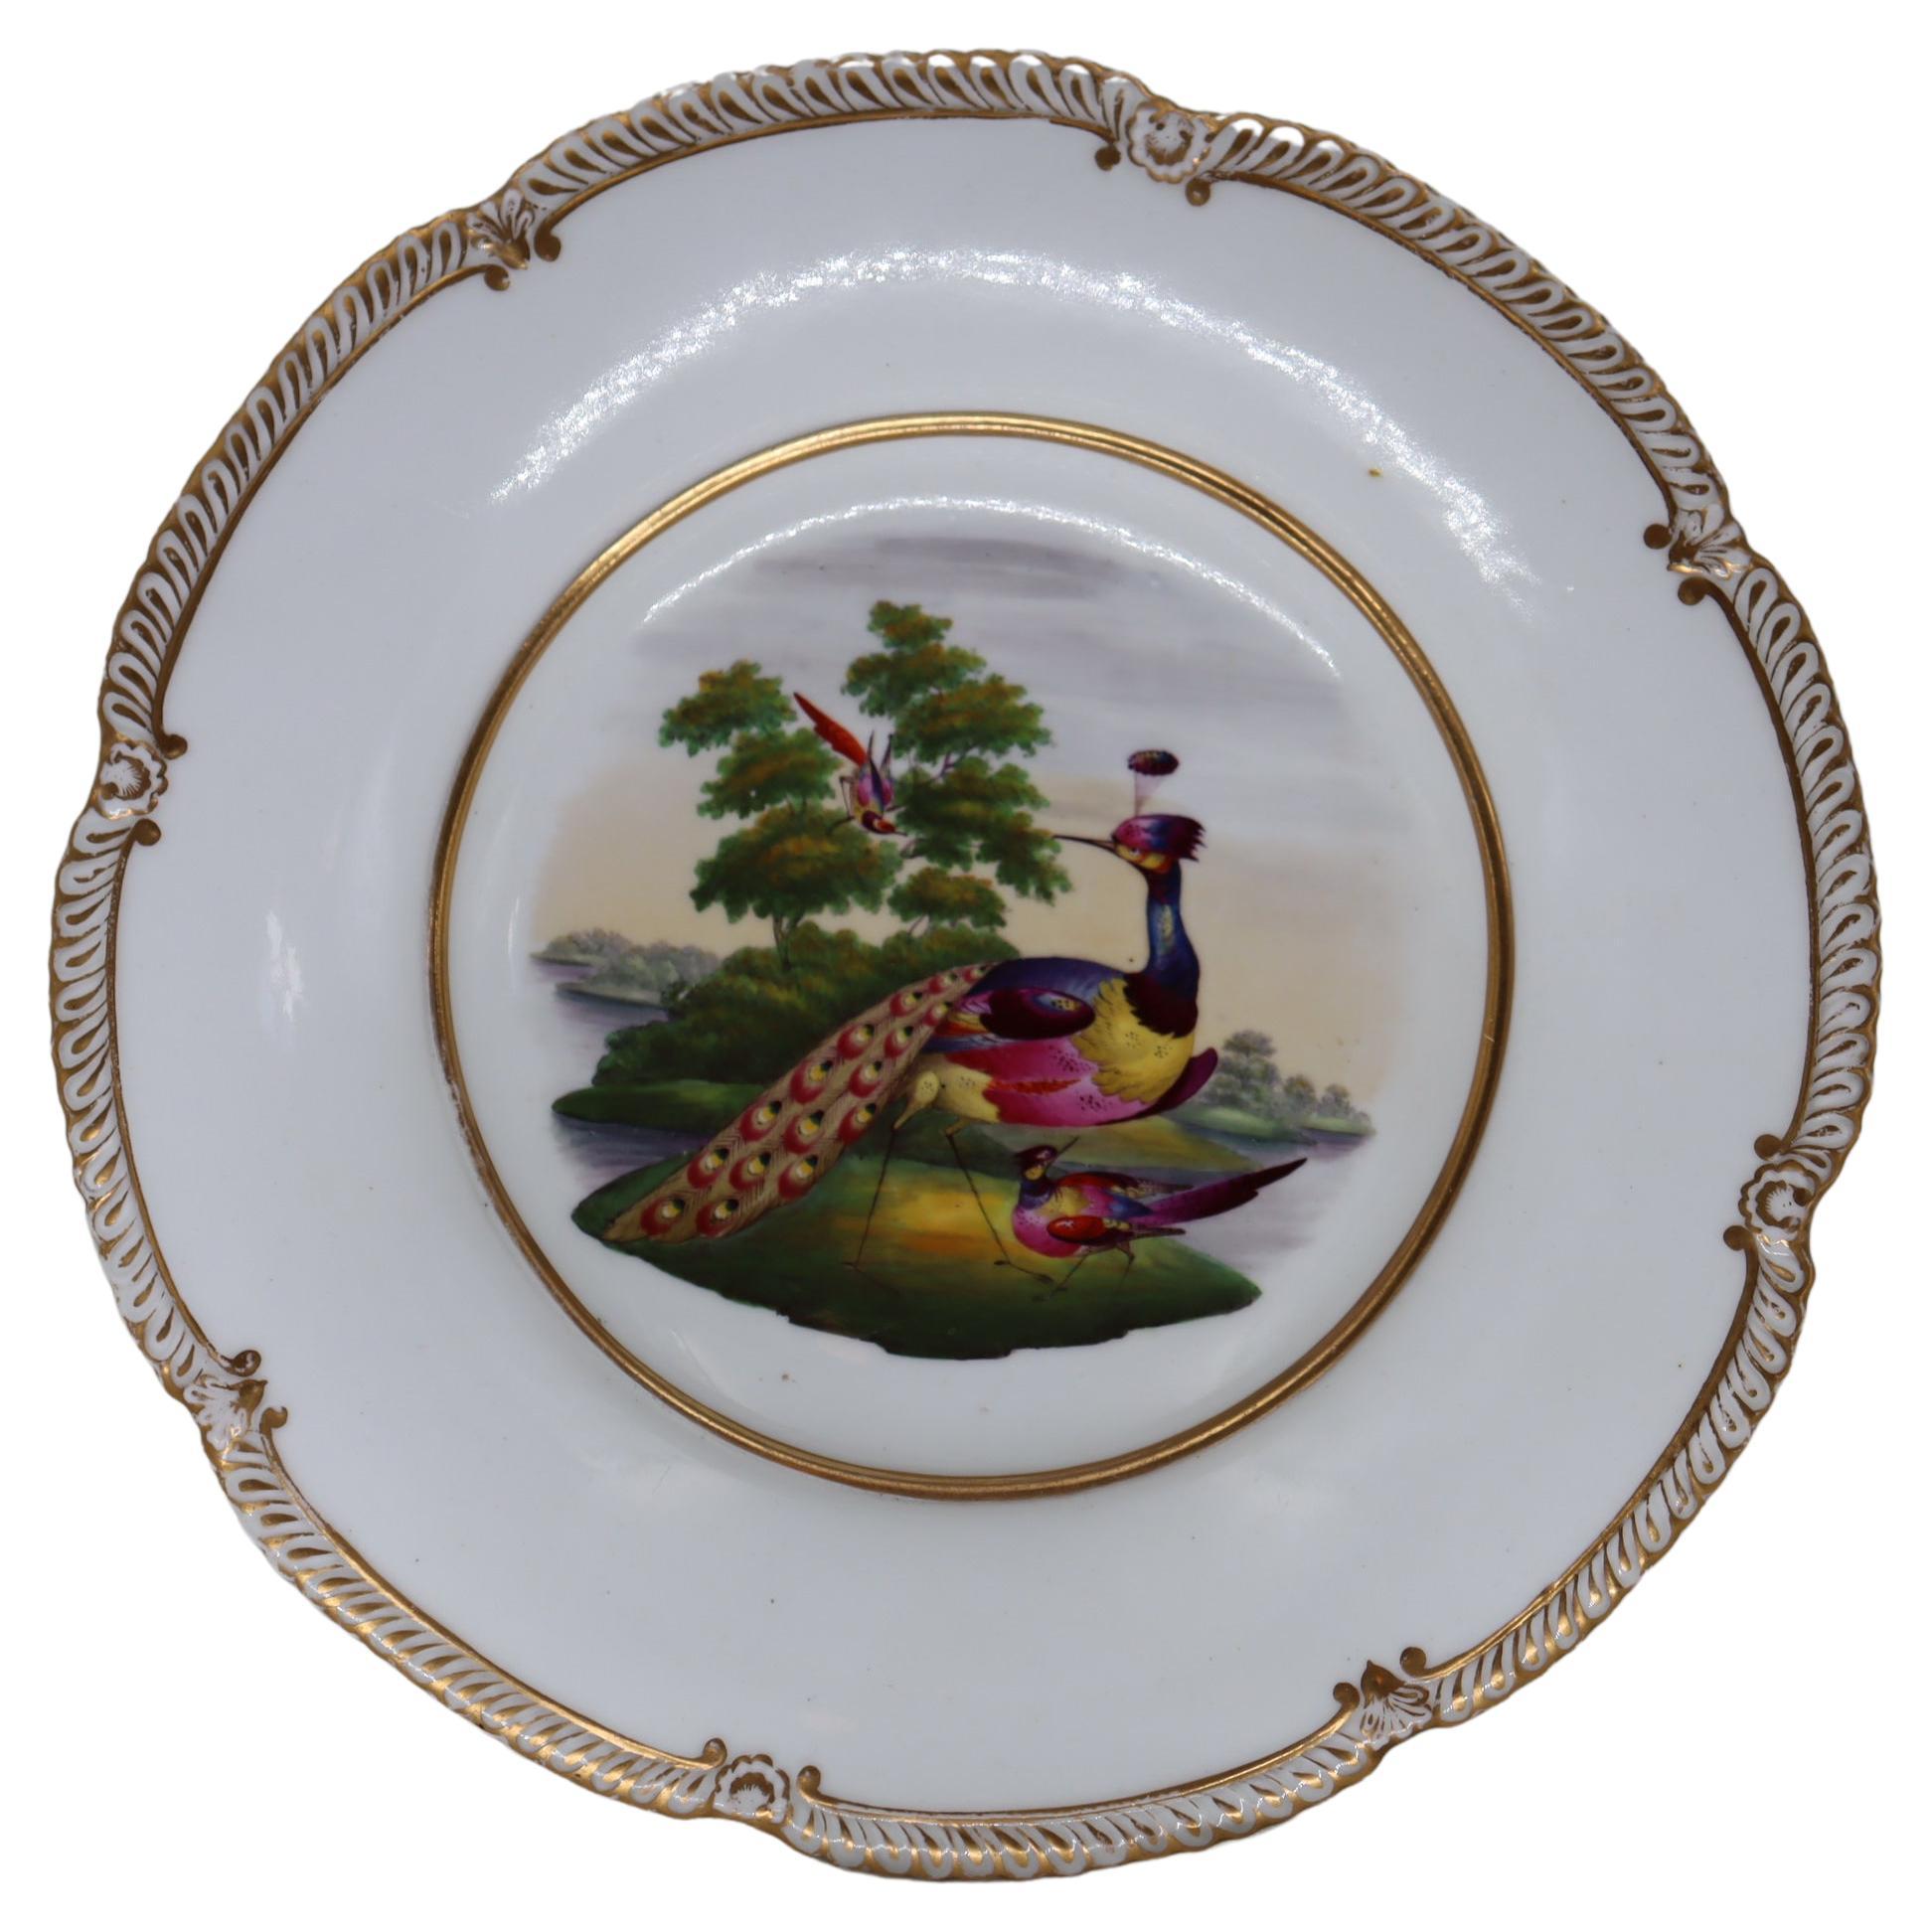 Chamberlains Worcester Platters and Serveware